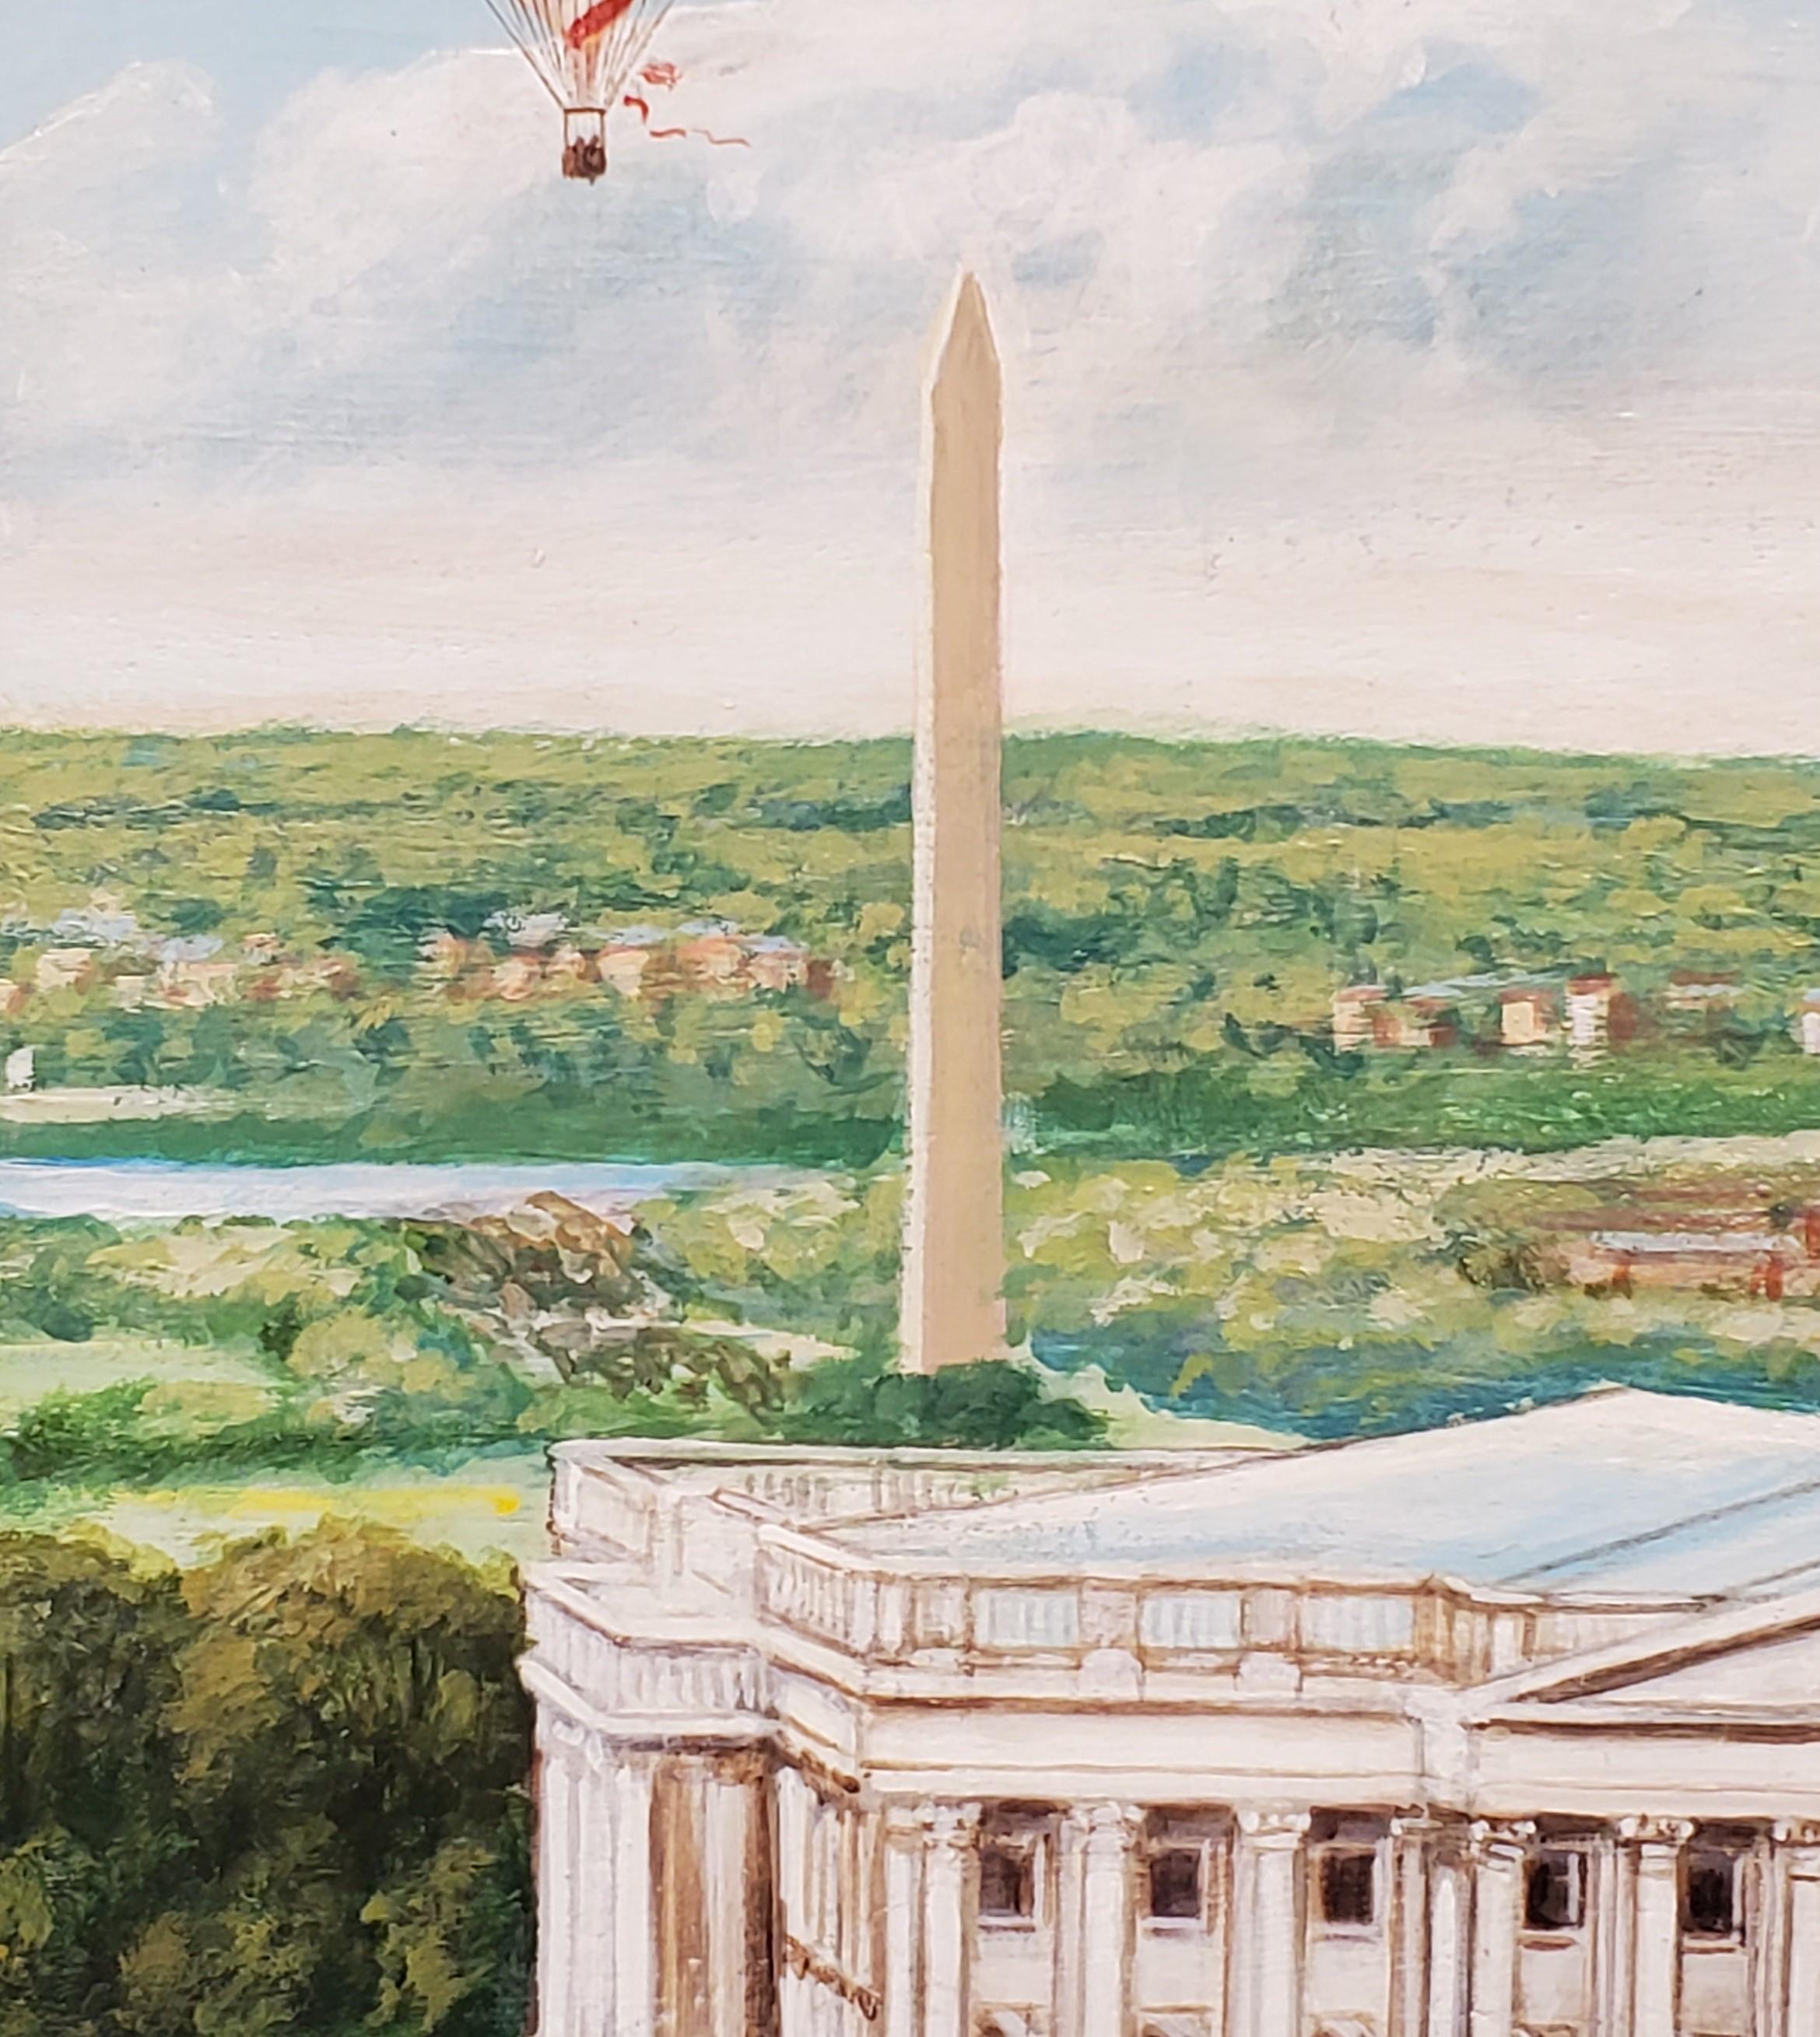 Grand 19th century Aeronautical Spectacular Over the US Capitol by Morris Flight 6